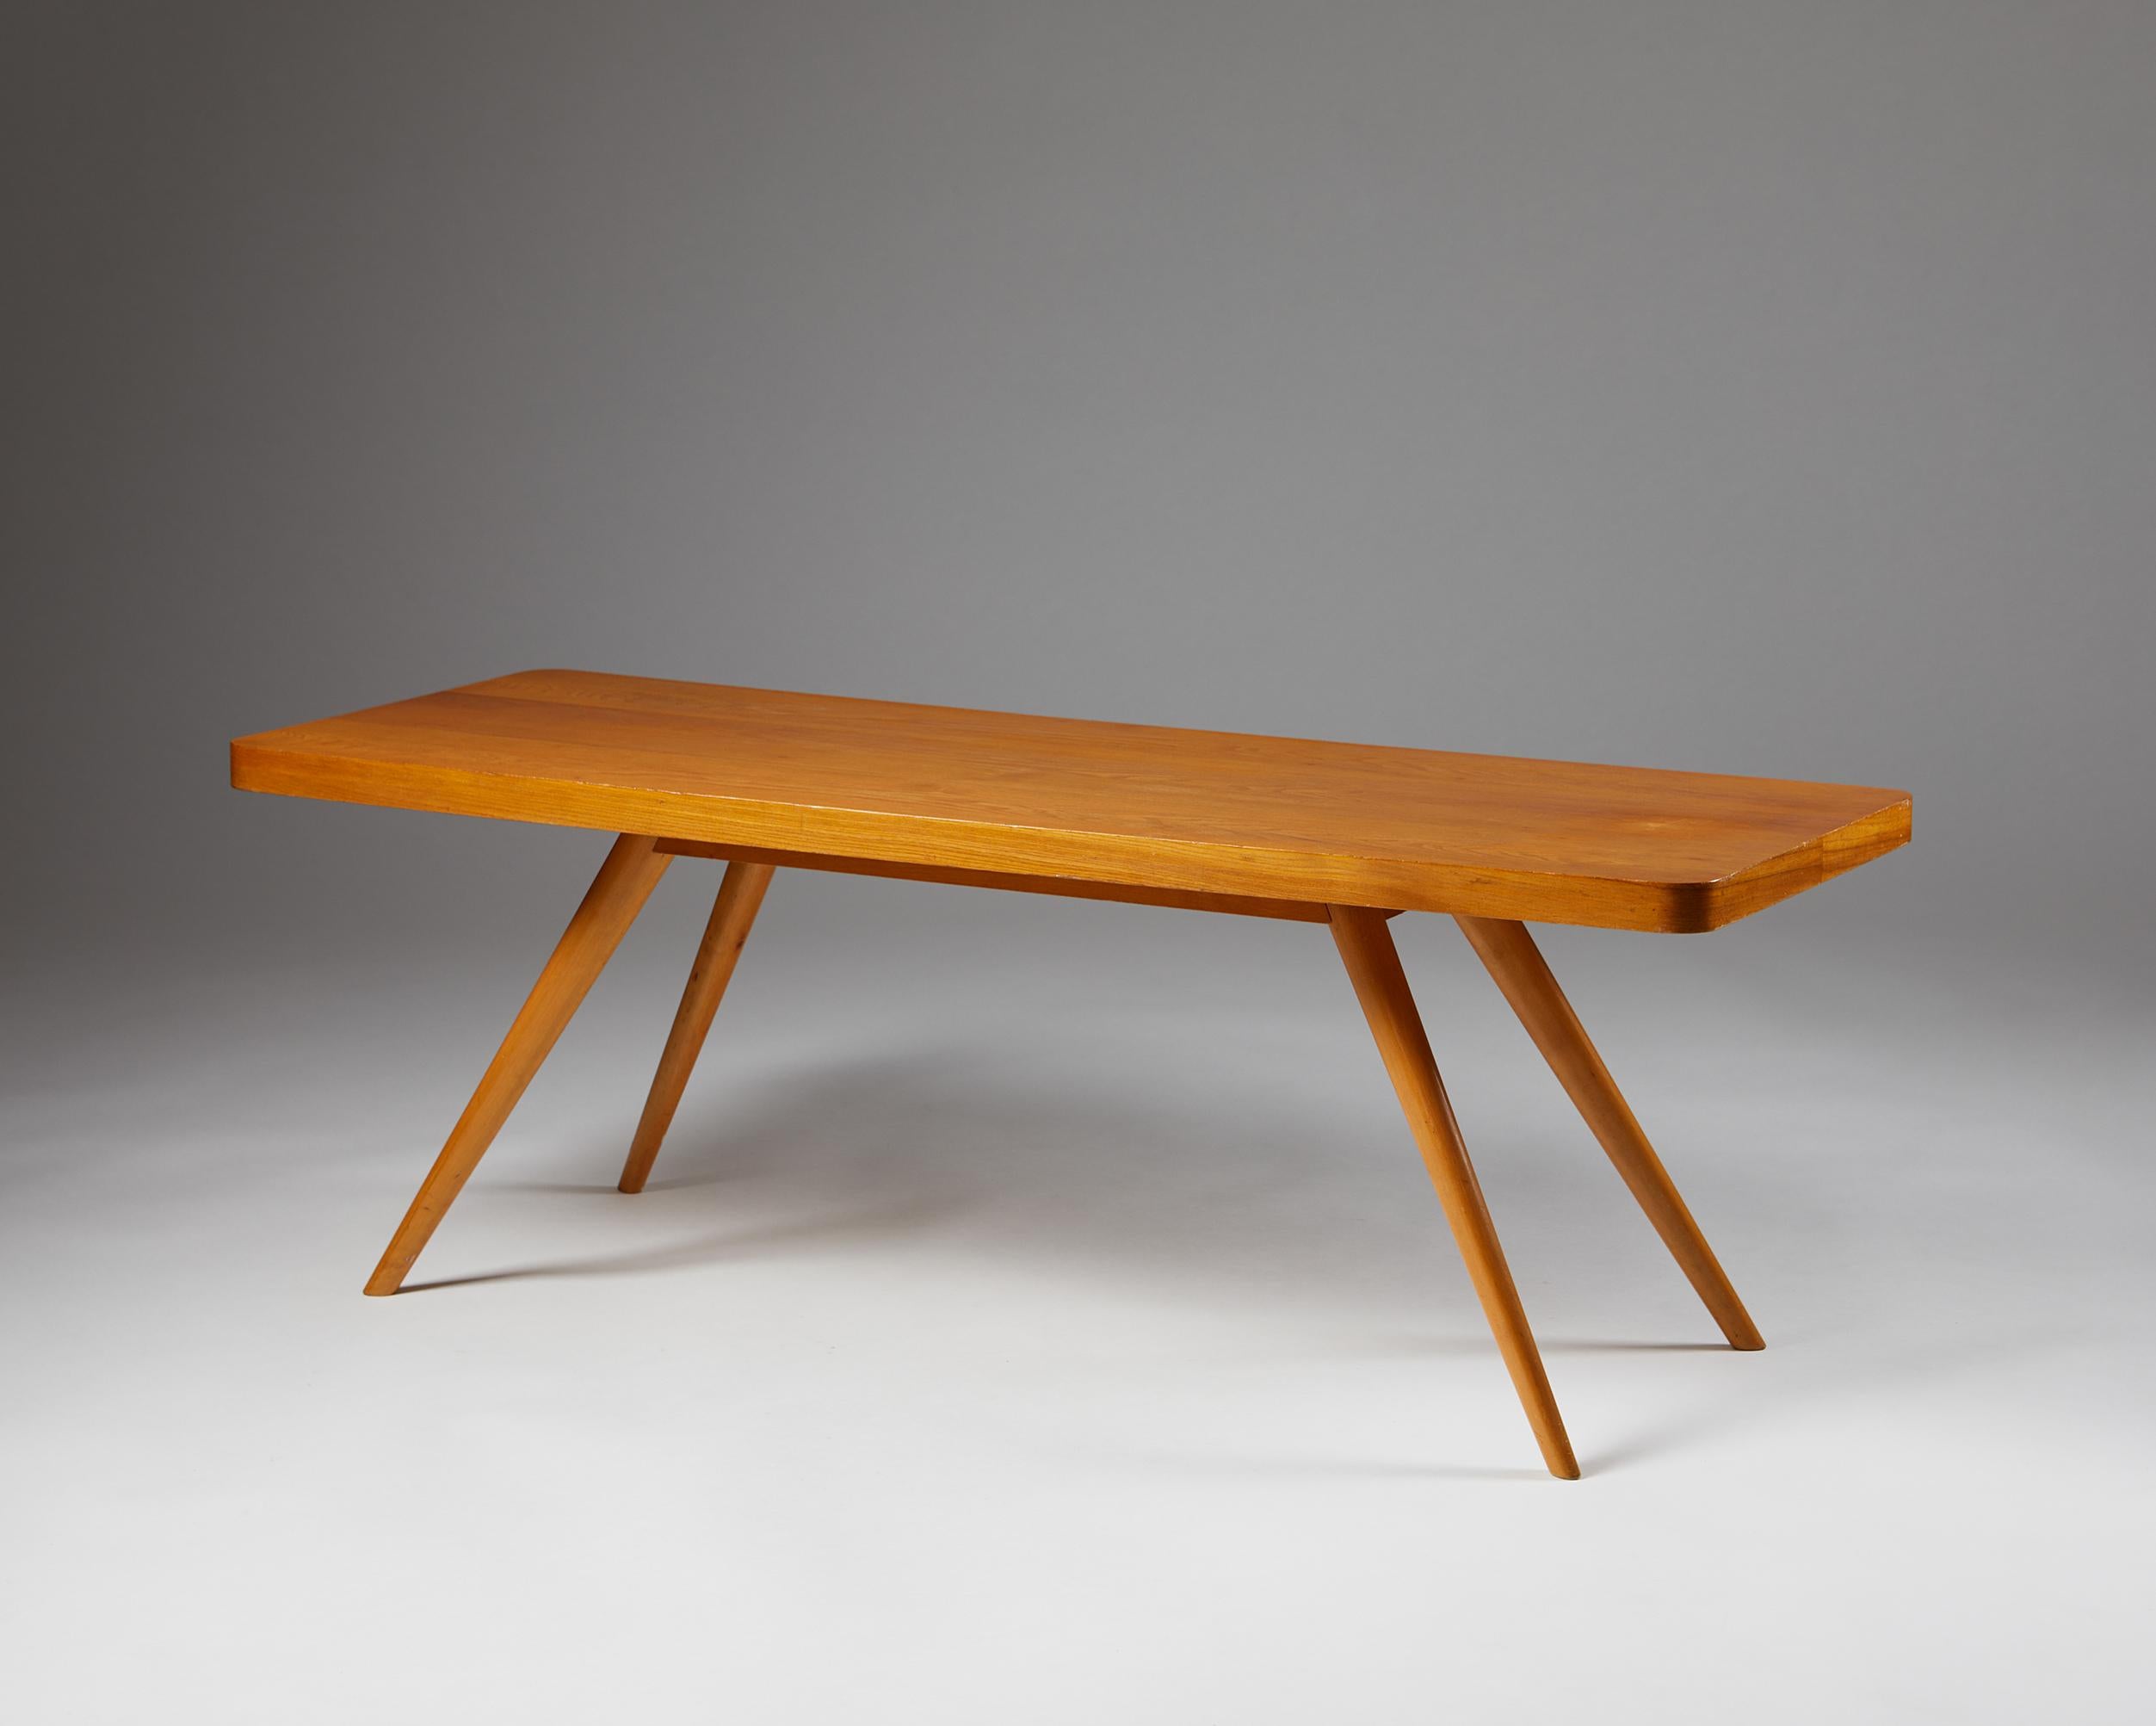 Occasional table, anonymous for Oy Stockmann AB,
Finland. 1950s.

Elm.

The most compelling aspect of this occasional table is the relationship of its legs to the surface. With splayed tapering legs, the well thought out design resembles an animal —